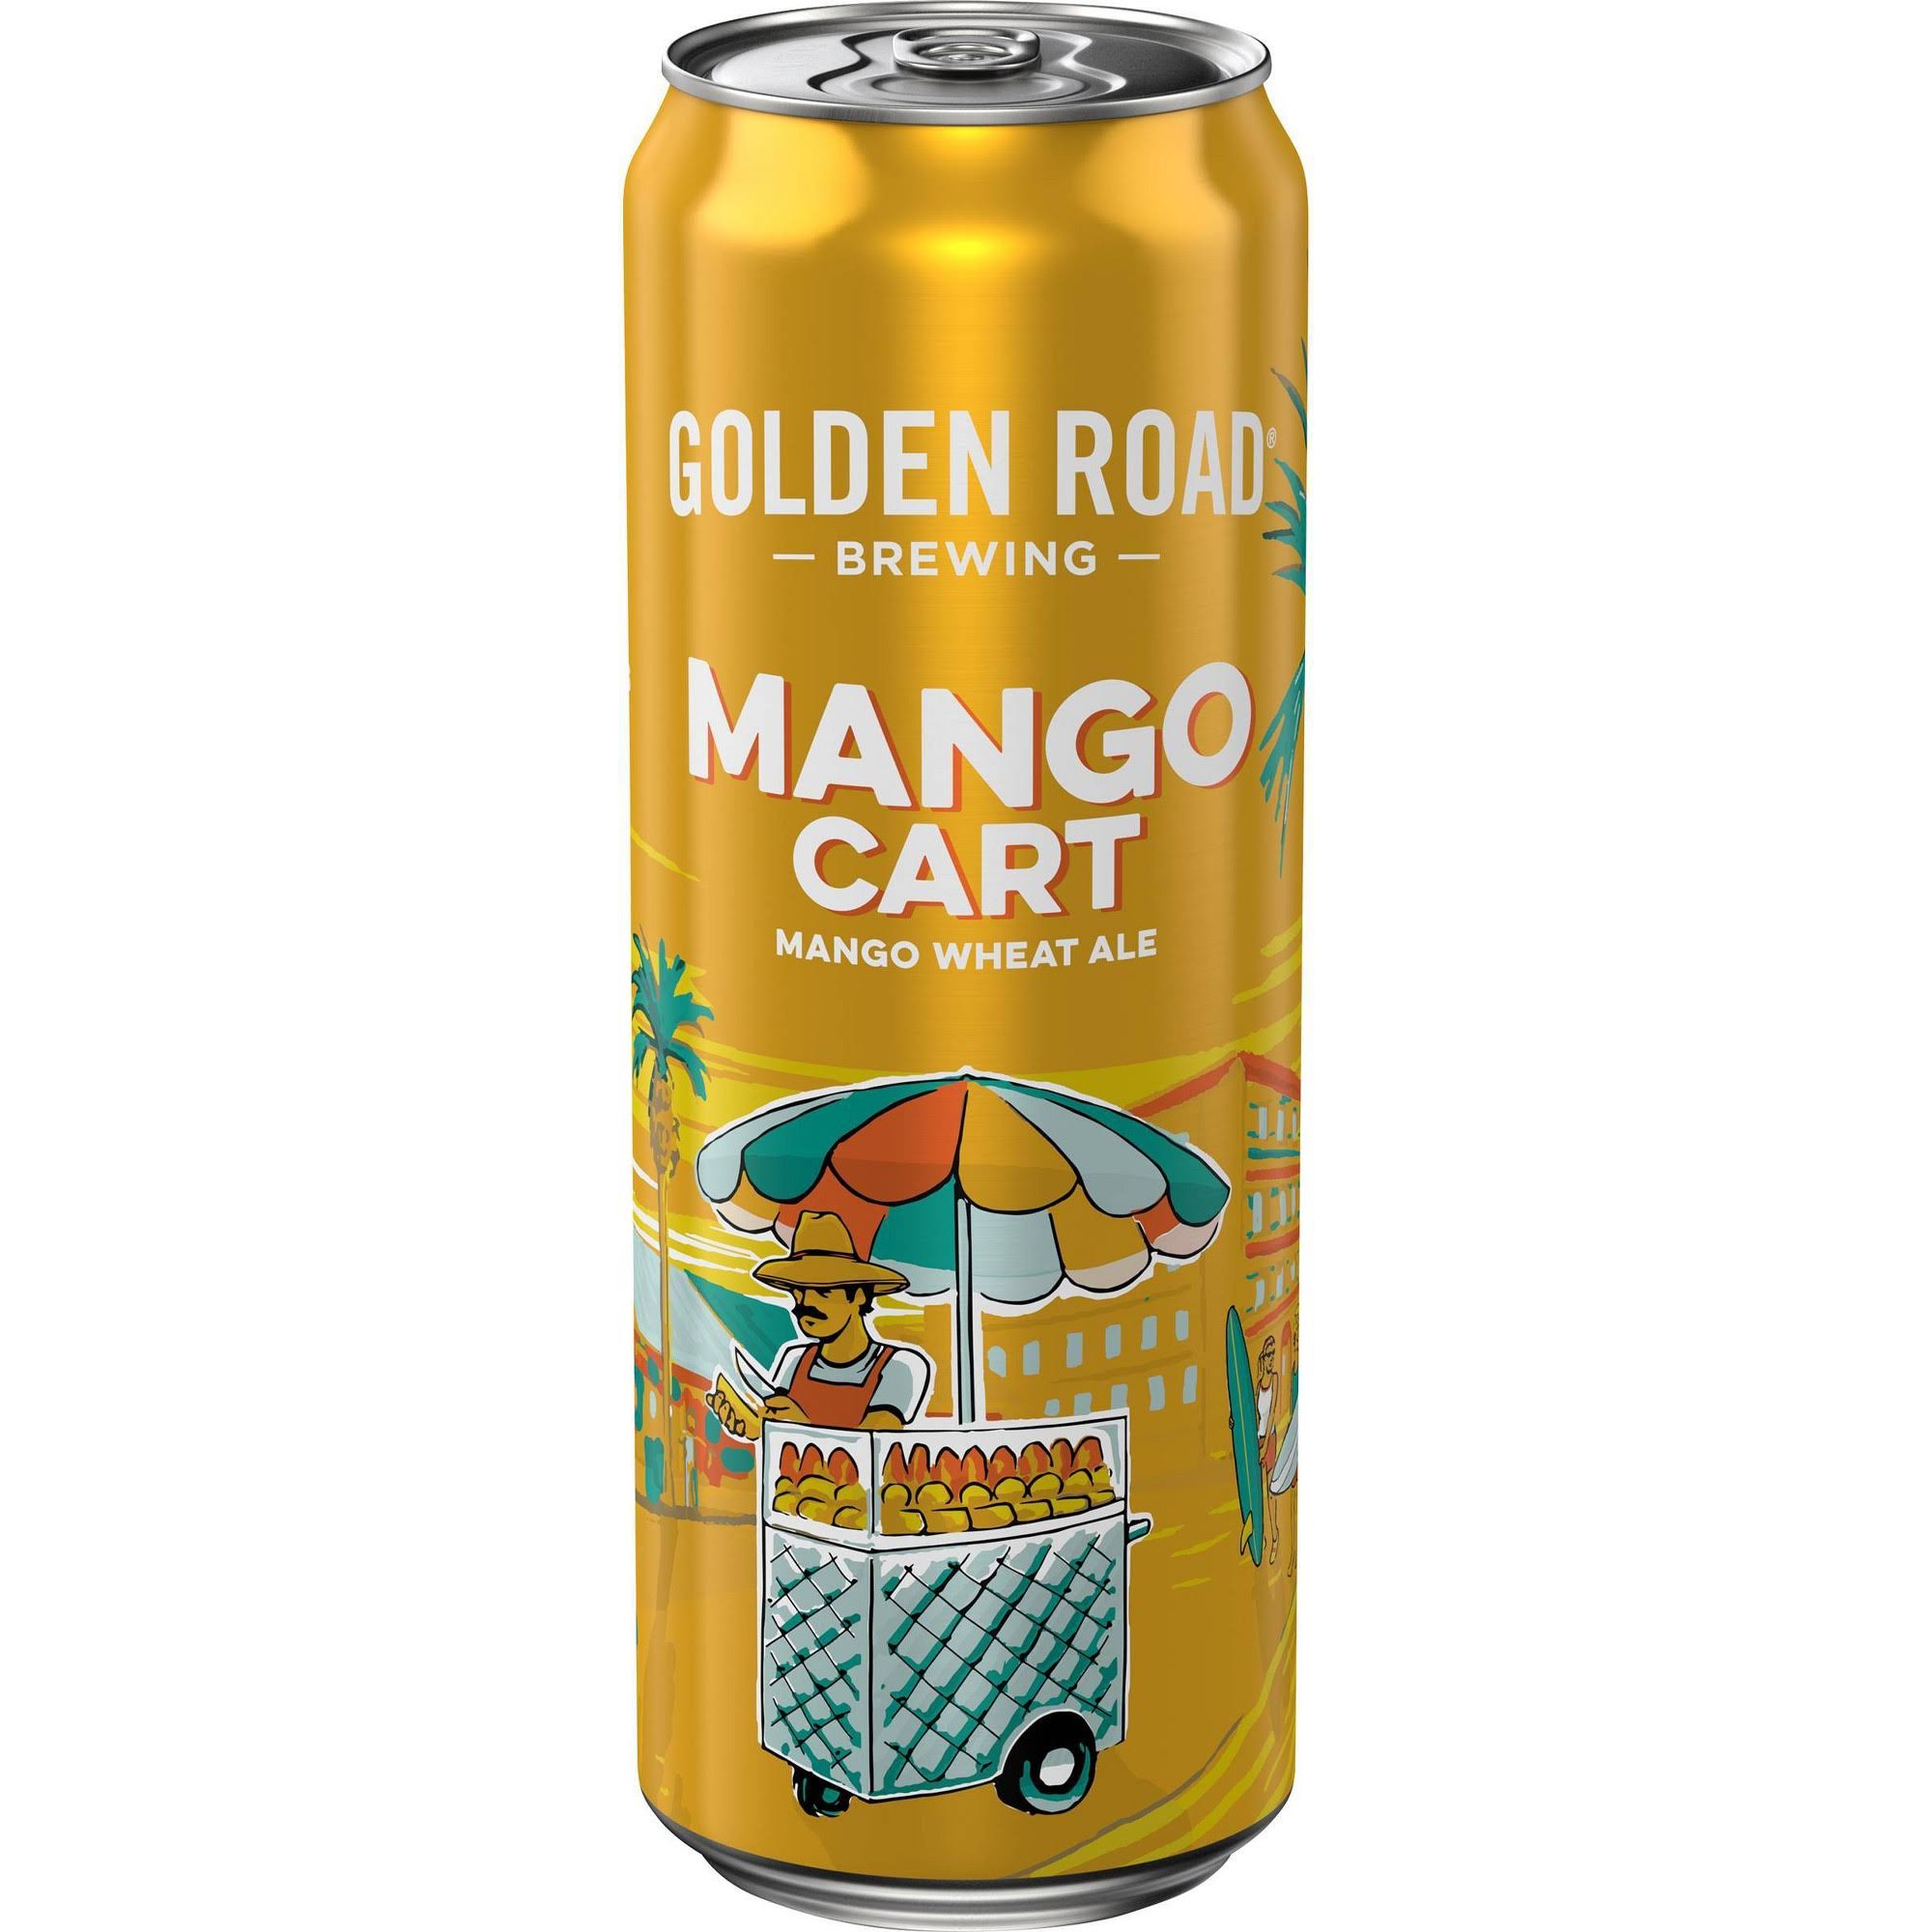 Golden Road Brewing Mango Cart Wheat Ale Beer Can - 25 oz